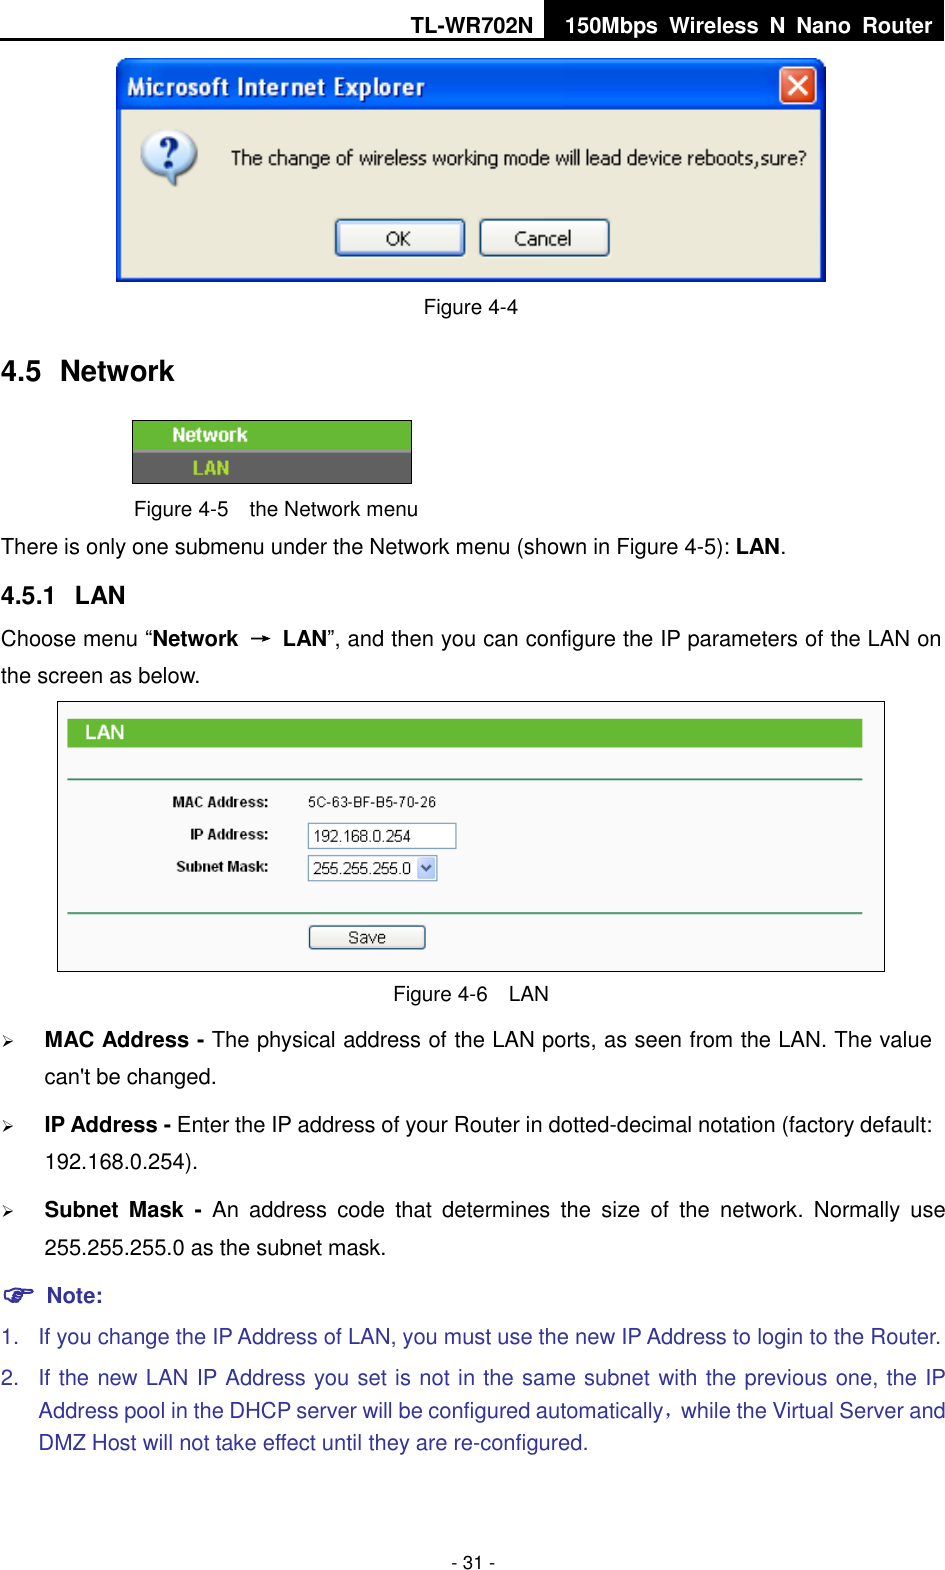 TL-WR702N 150Mbps  Wireless  N  Nano  Router  - 31 -  Figure 4-4 4.5  Network  Figure 4-5  the Network menu There is only one submenu under the Network menu (shown in Figure 4-5): LAN.  4.5.1  LAN Choose menu “Network  →  LAN”, and then you can configure the IP parameters of the LAN on the screen as below.  Figure 4-6  LAN  MAC Address - The physical address of the LAN ports, as seen from the LAN. The value can&apos;t be changed.  IP Address - Enter the IP address of your Router in dotted-decimal notation (factory default: 192.168.0.254).  Subnet  Mask  -  An  address  code  that  determines  the  size  of  the  network.  Normally  use 255.255.255.0 as the subnet mask.    Note: 1.  If you change the IP Address of LAN, you must use the new IP Address to login to the Router.   2.  If the new LAN IP Address you set is not in the same subnet with the previous one, the IP Address pool in the DHCP server will be configured automatically，while the Virtual Server and DMZ Host will not take effect until they are re-configured. 